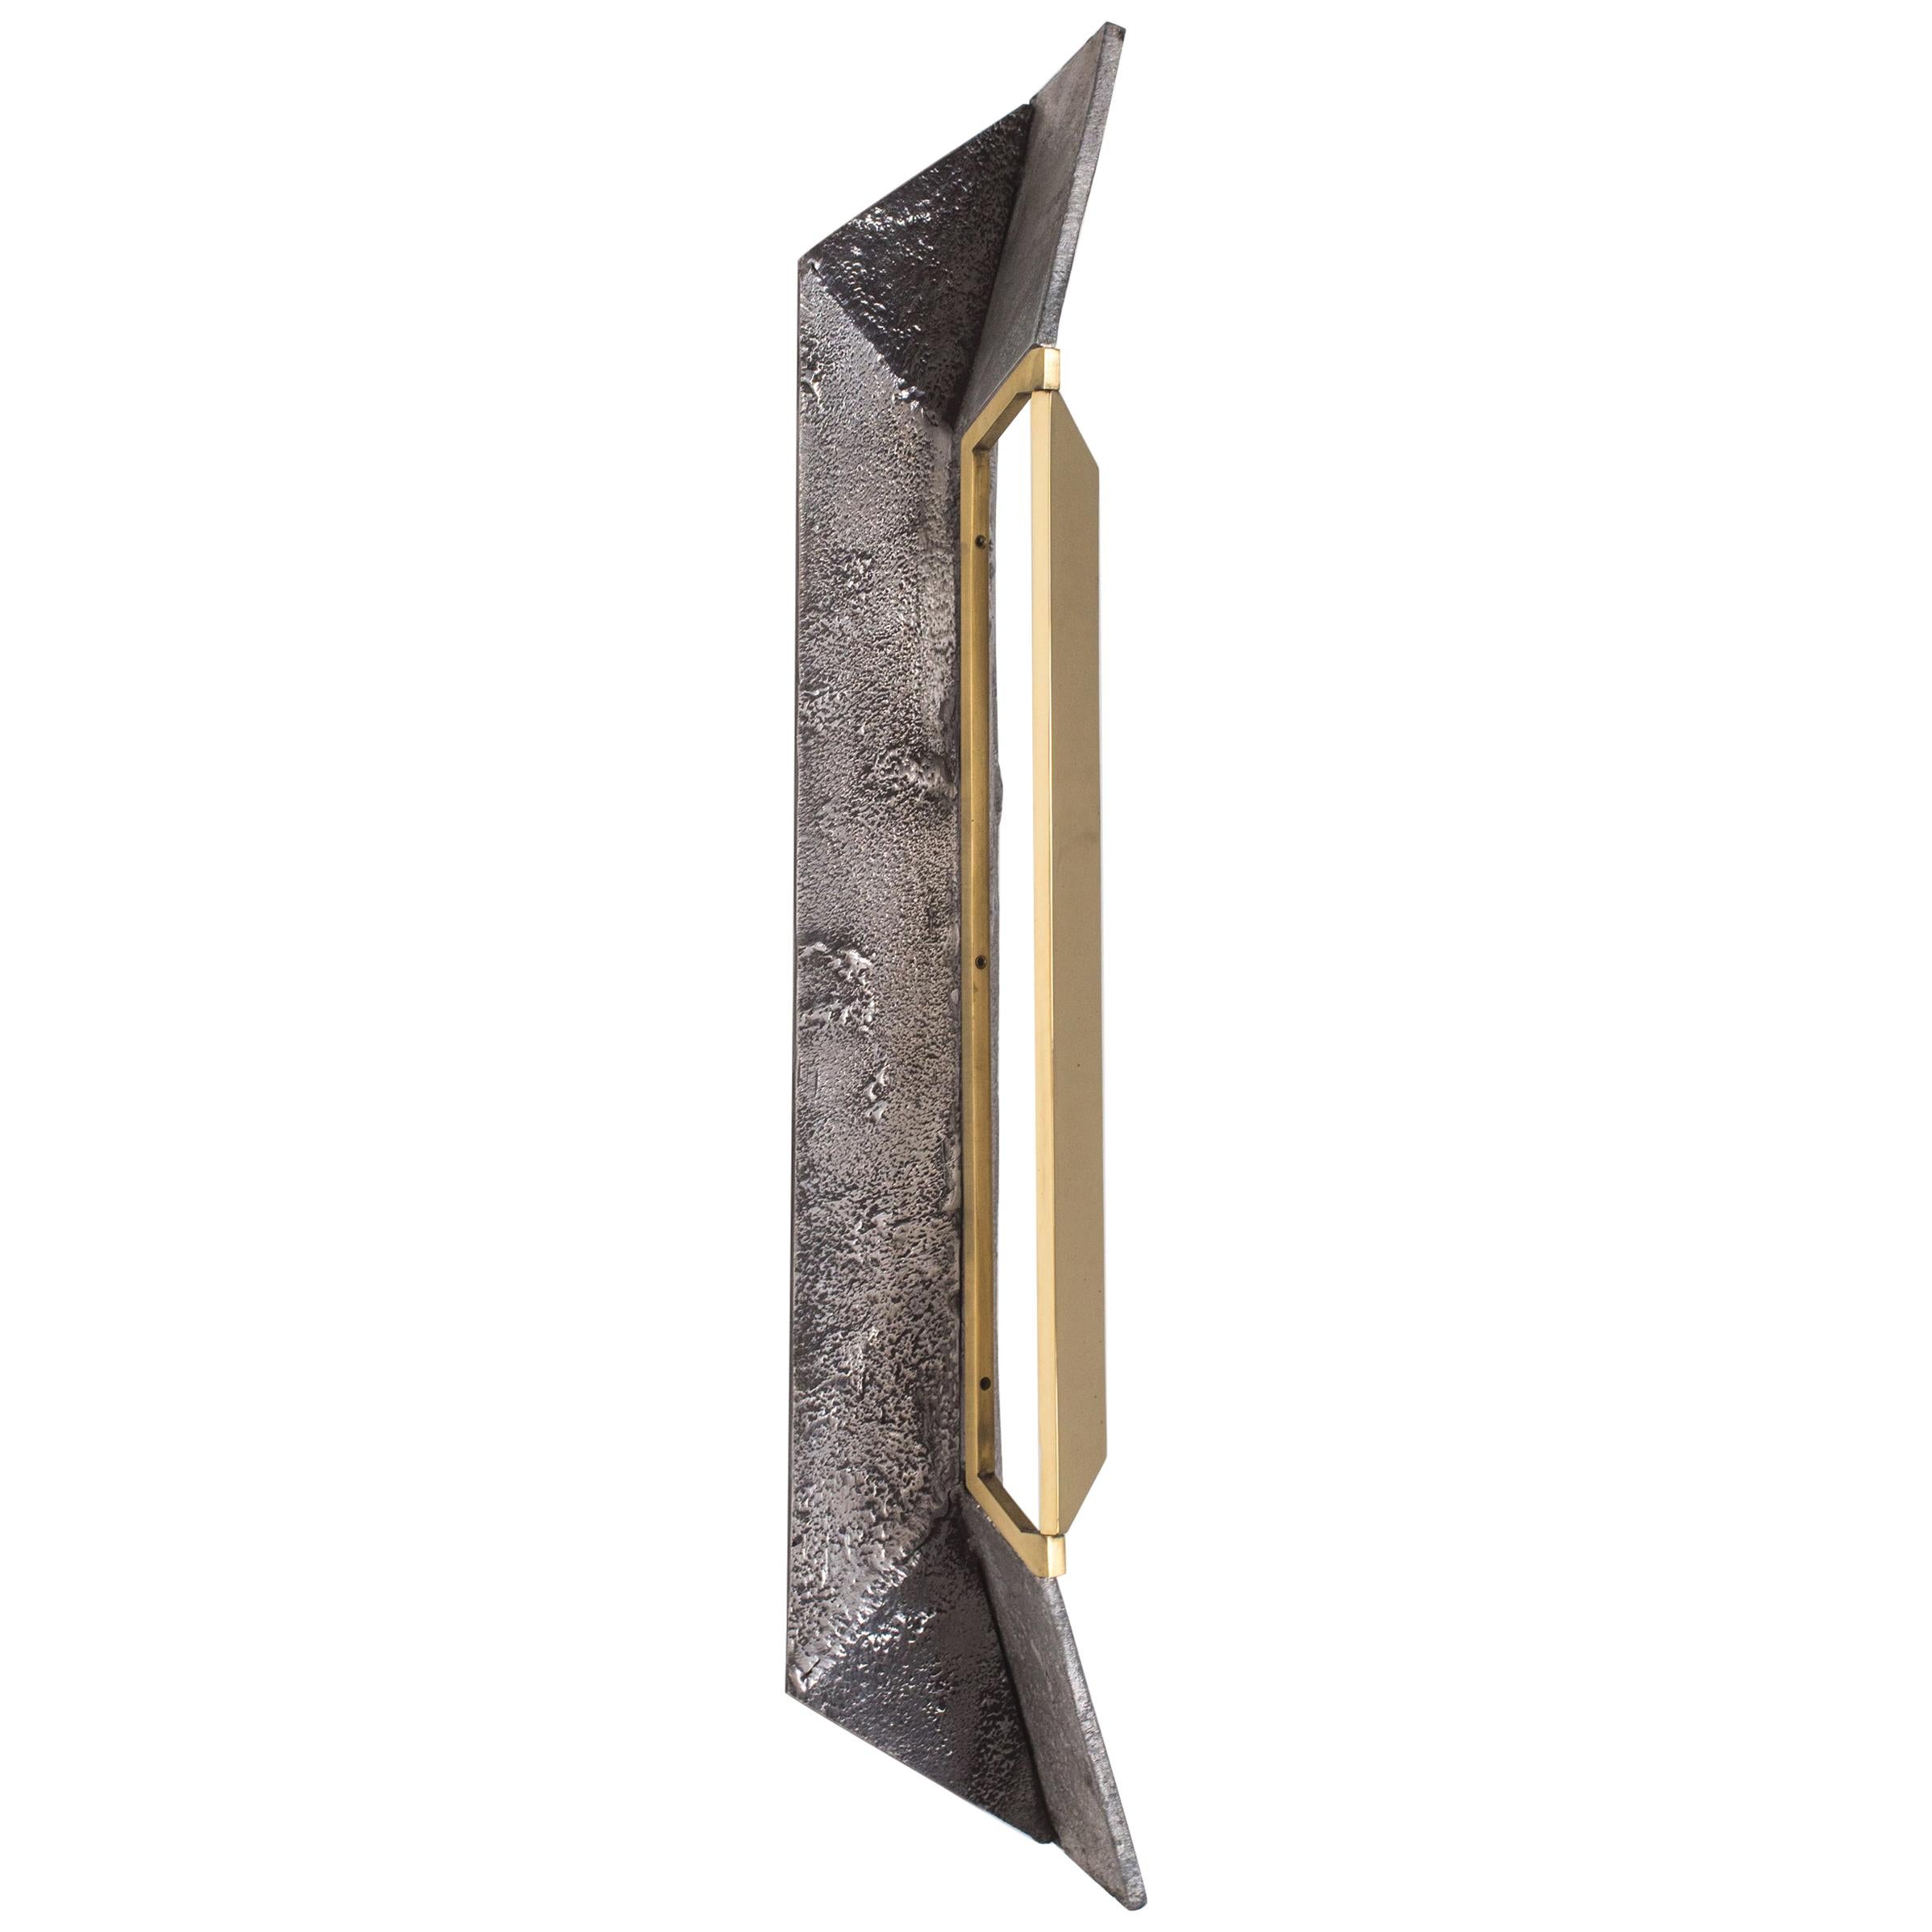 Cast Aluminum and Brass "Gallium" Sconce by Arcana For Sale